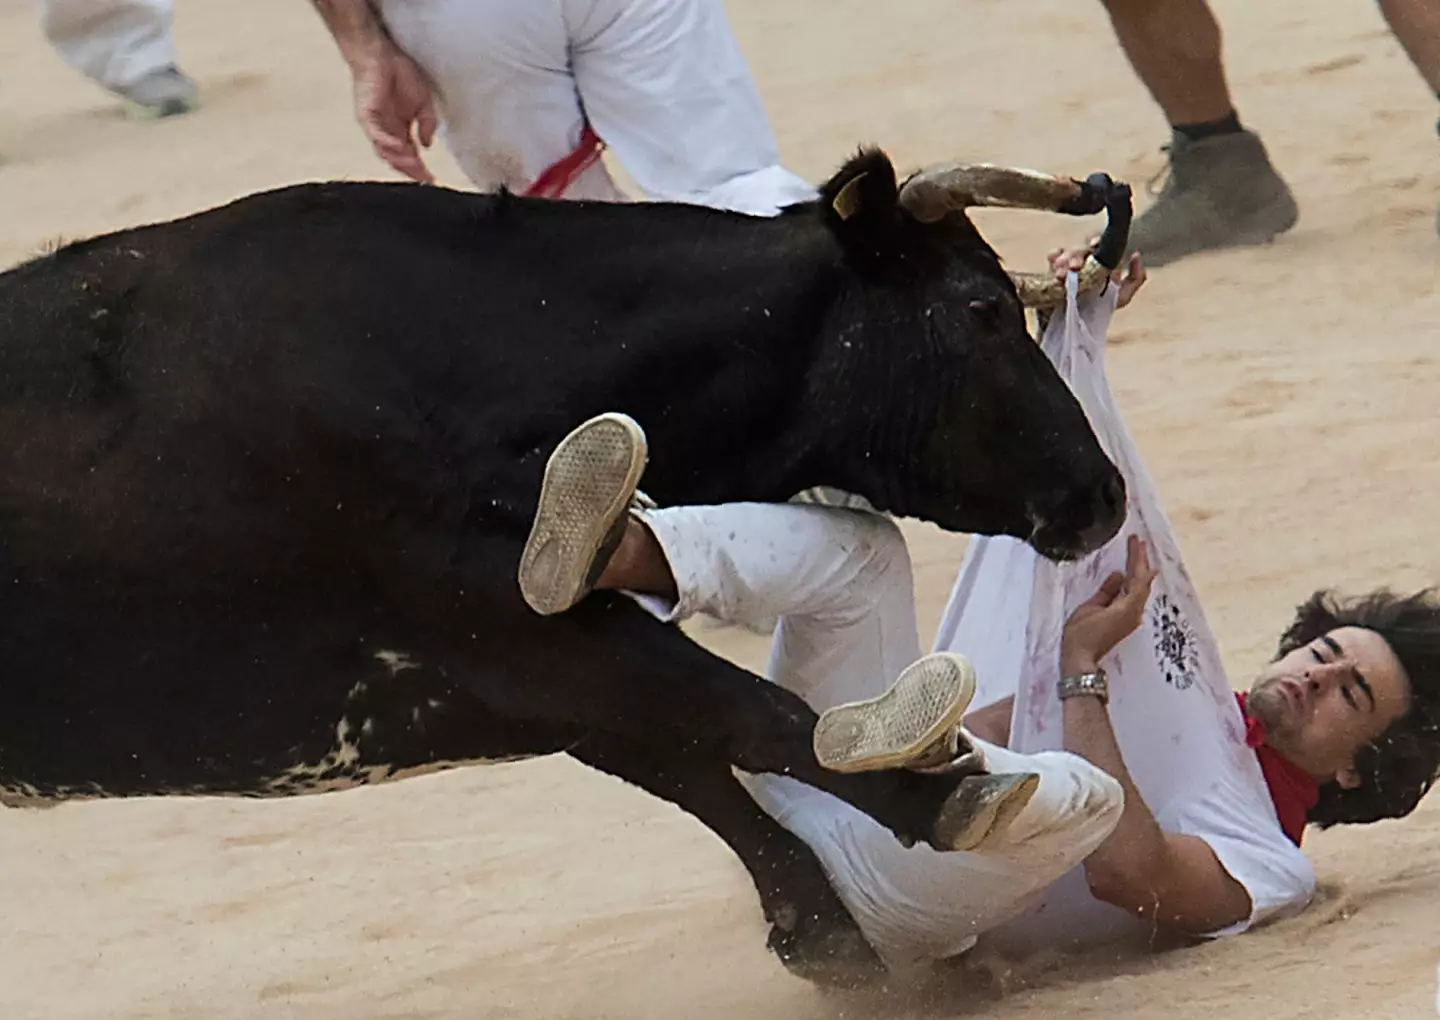 A man is struck by one of the bulls.